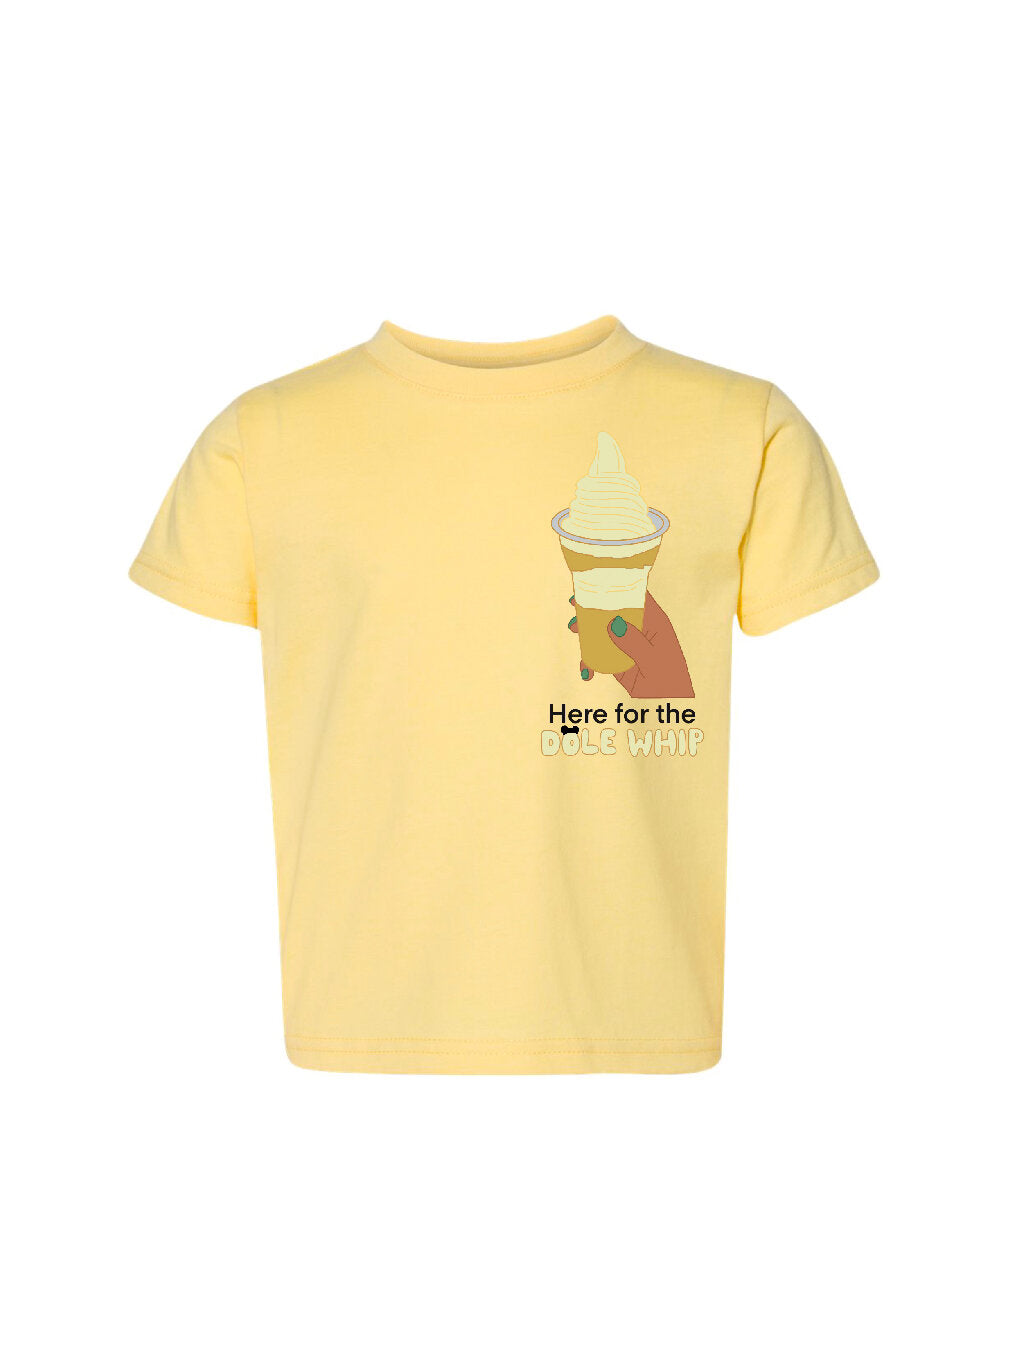 Here for the Dole Whip Kids Tee